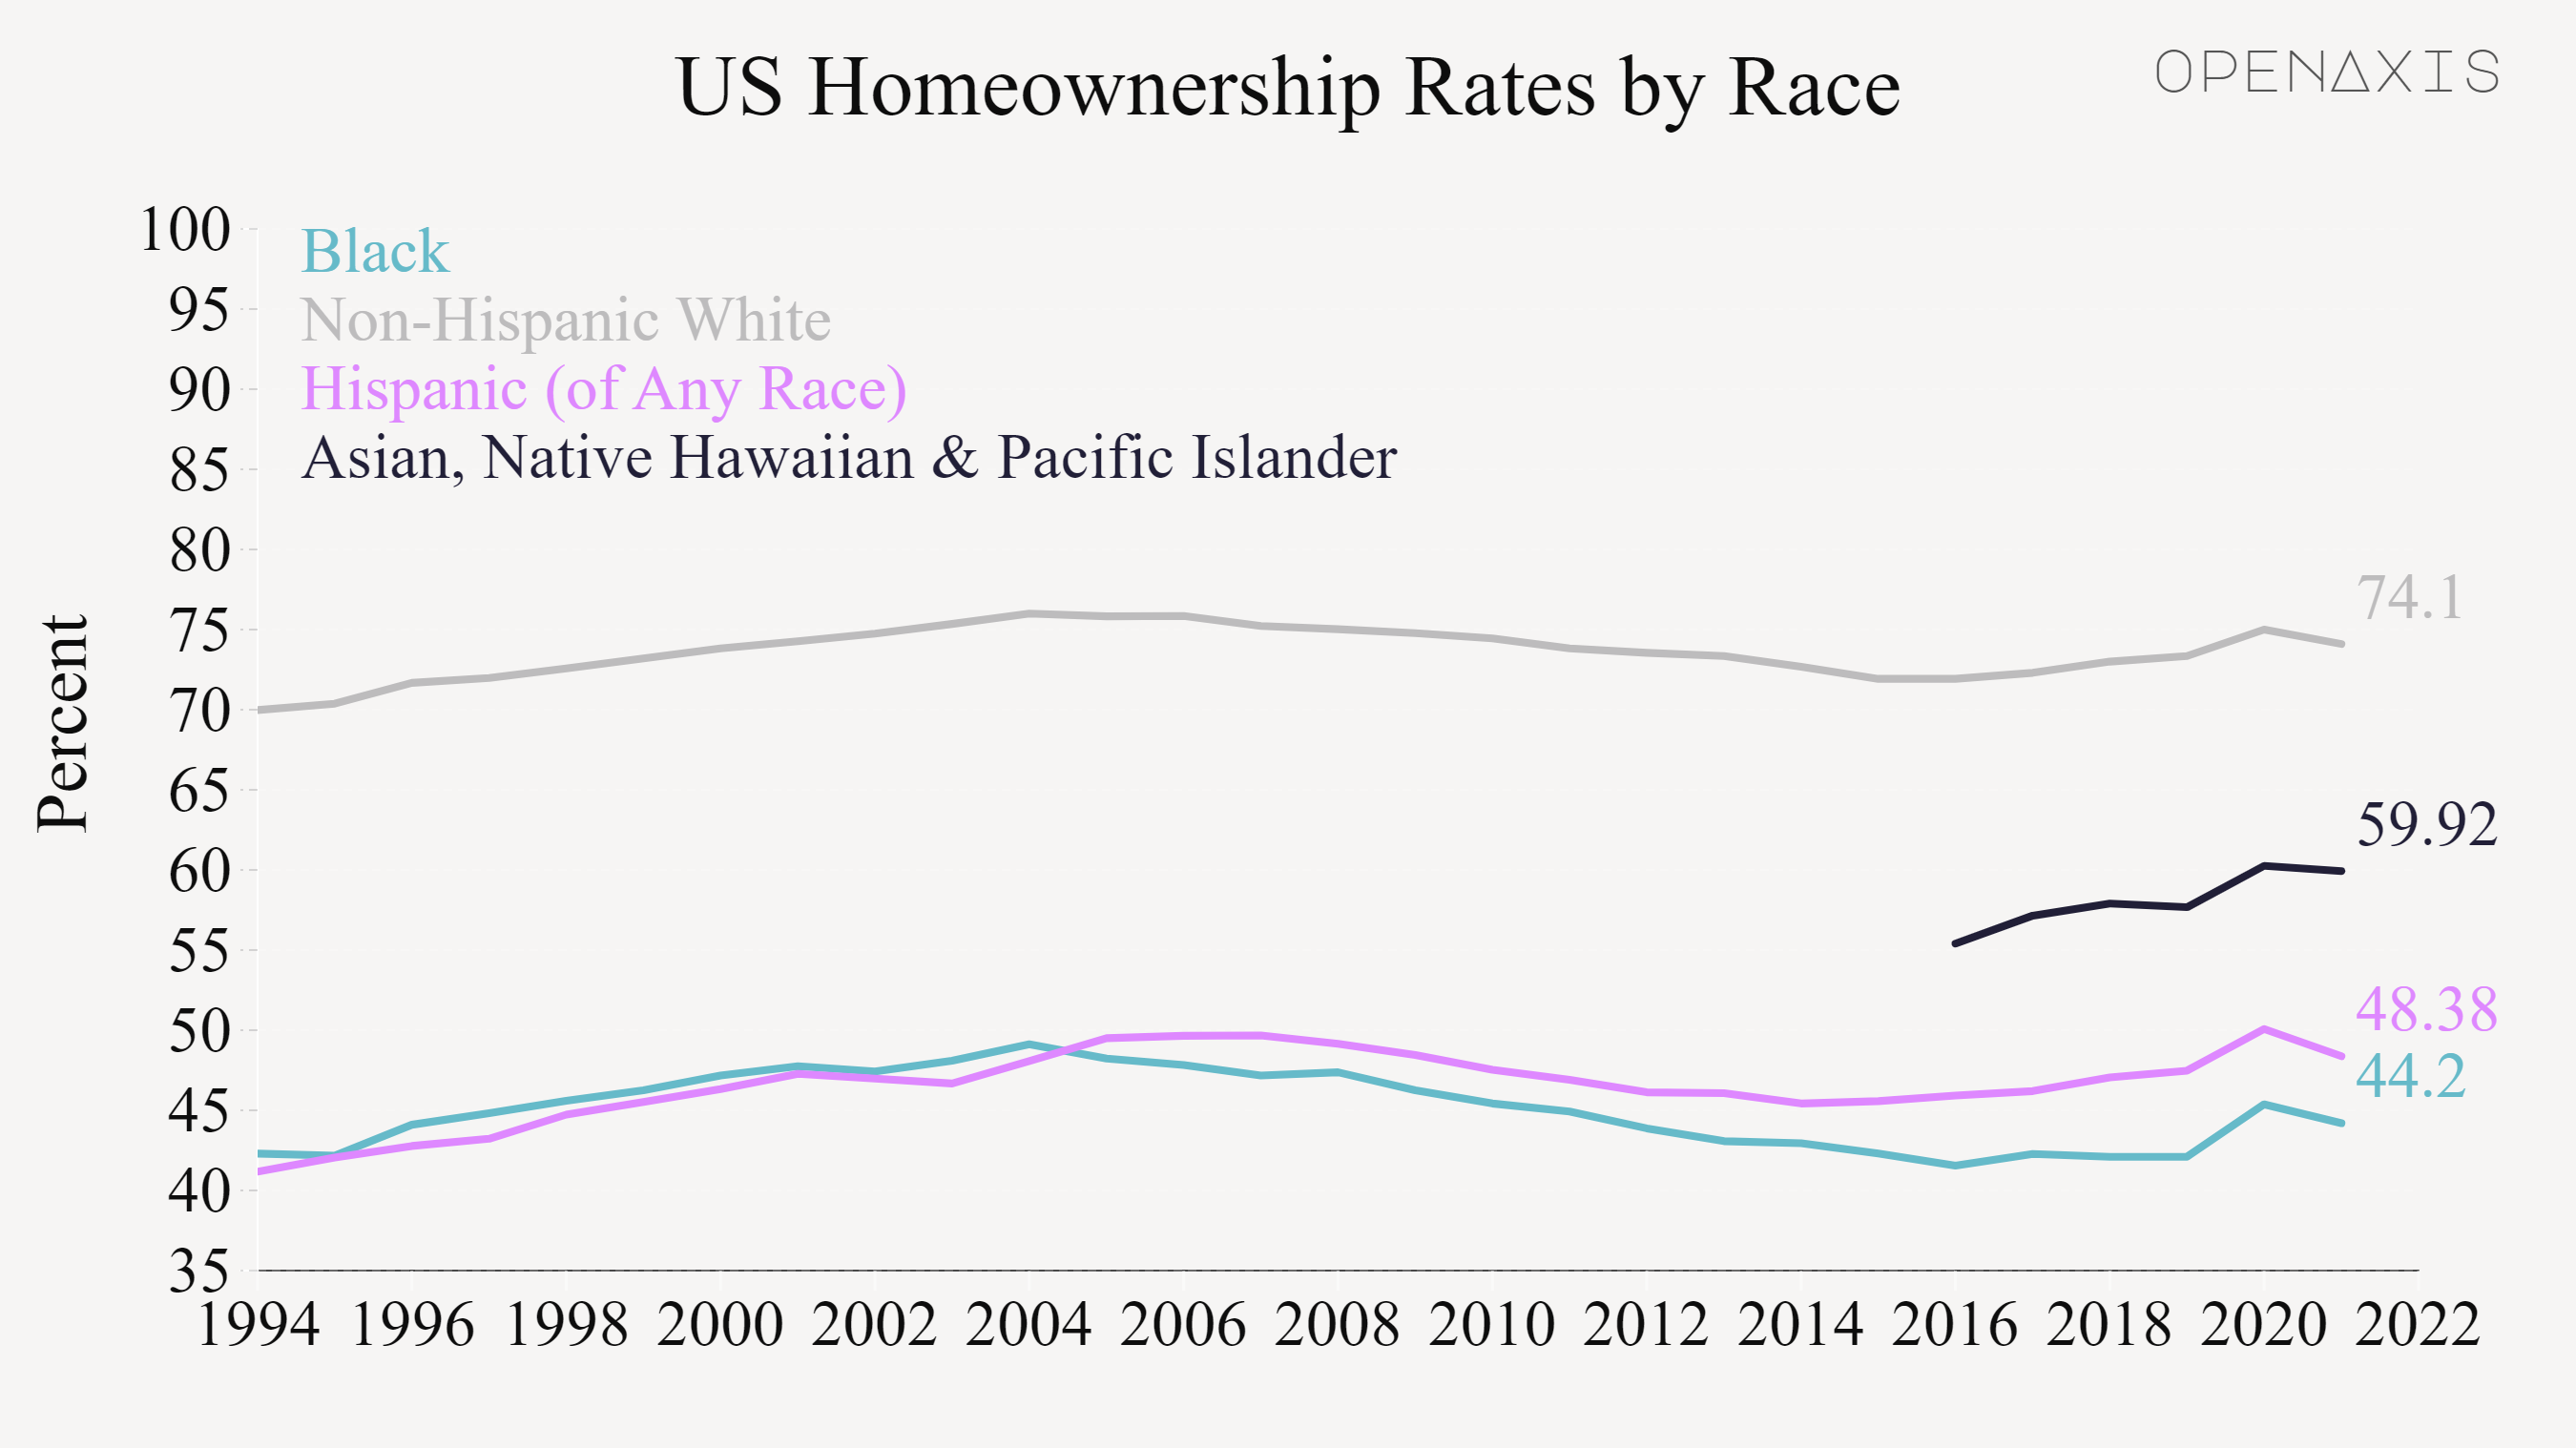 "US Homeownership Rates by Race"